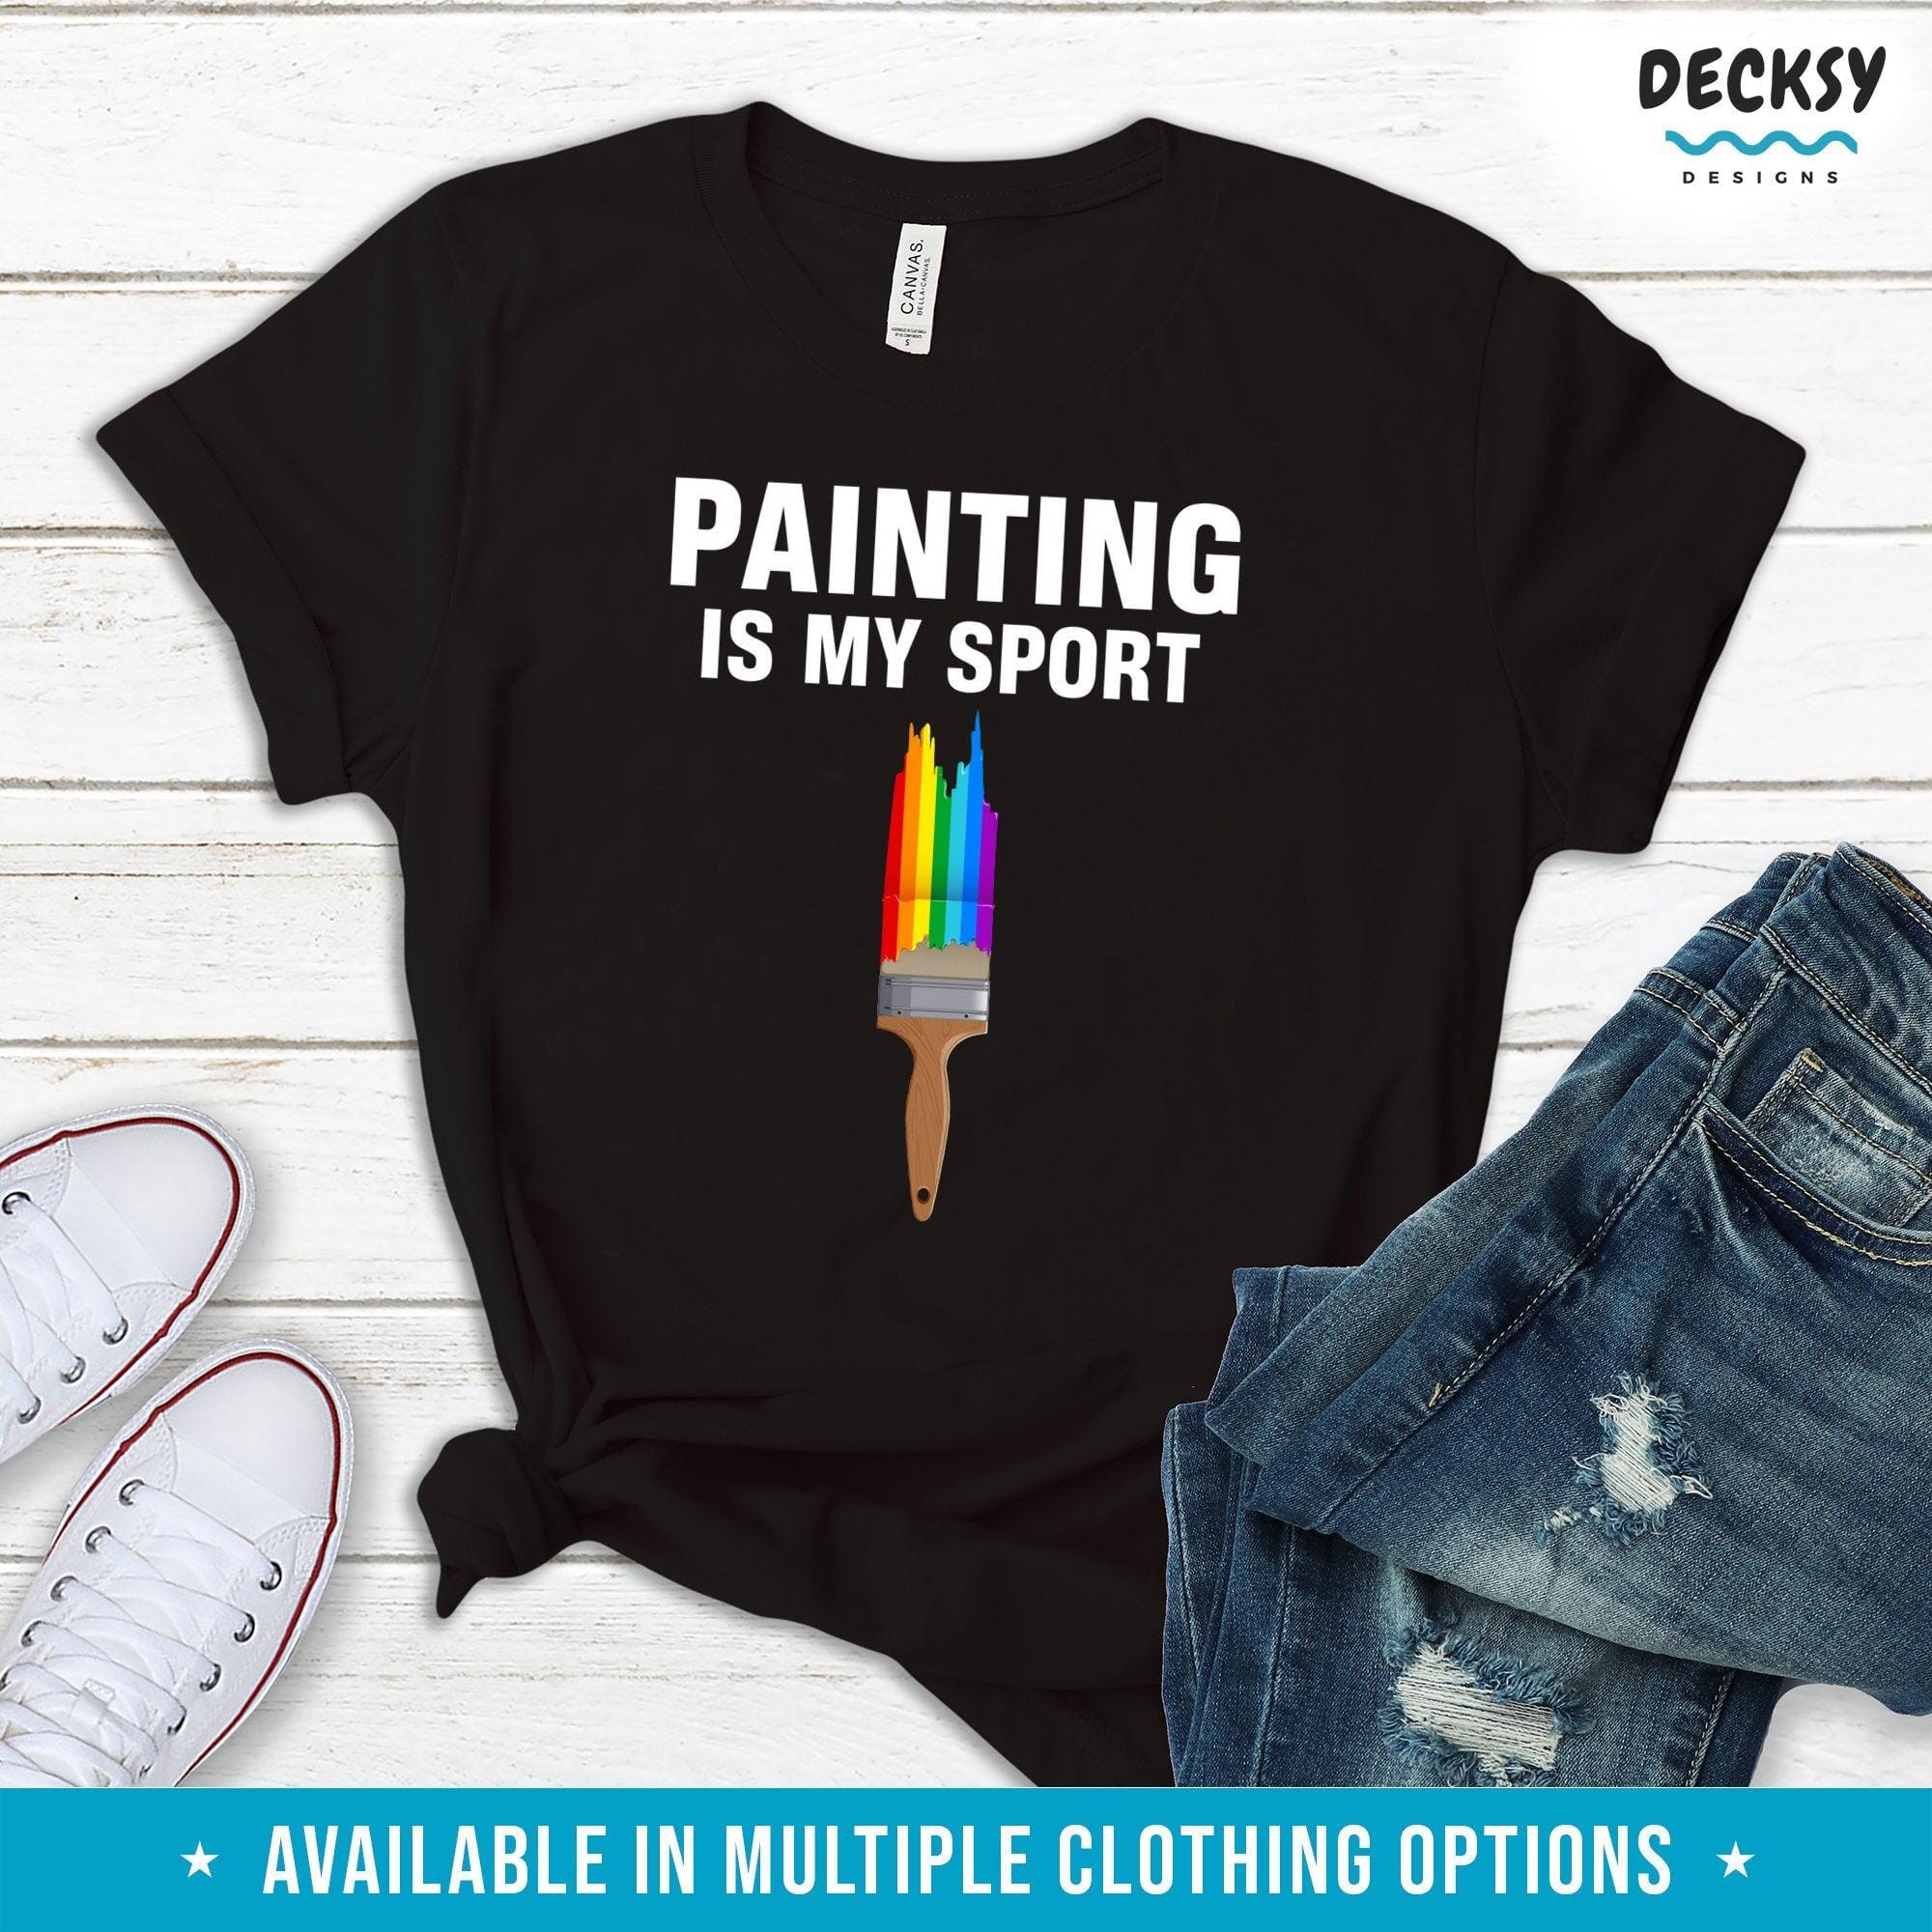 Artist Shirt, Funny Painter Gift-Clothing:Gender-Neutral Adult Clothing:Tops & Tees:T-shirts:Graphic Tees-DecksyDesigns